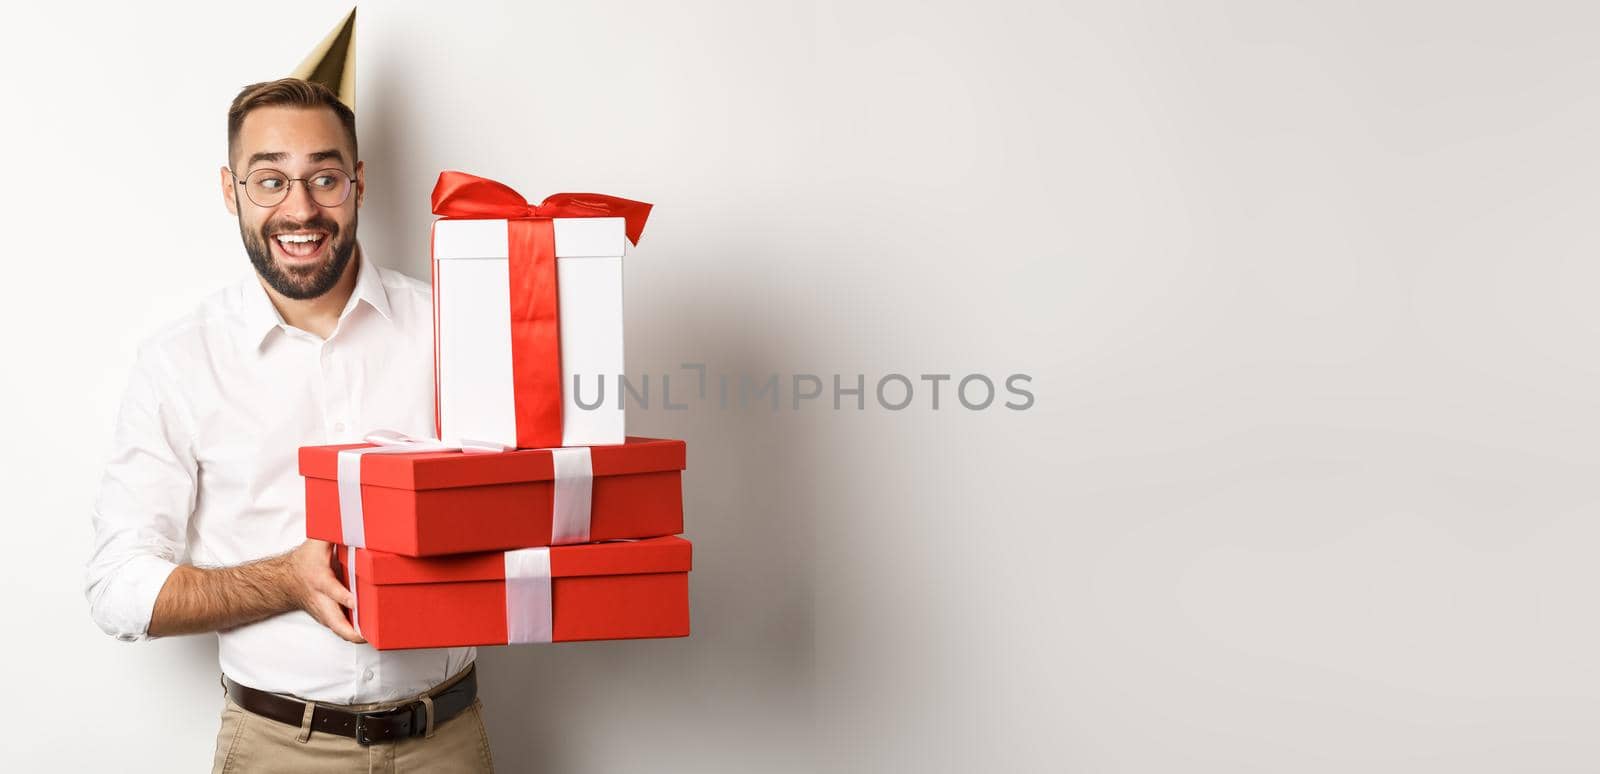 Holidays and celebration. Excited man having birthday party and receiving gifts, looking happy, standing over white background by Benzoix